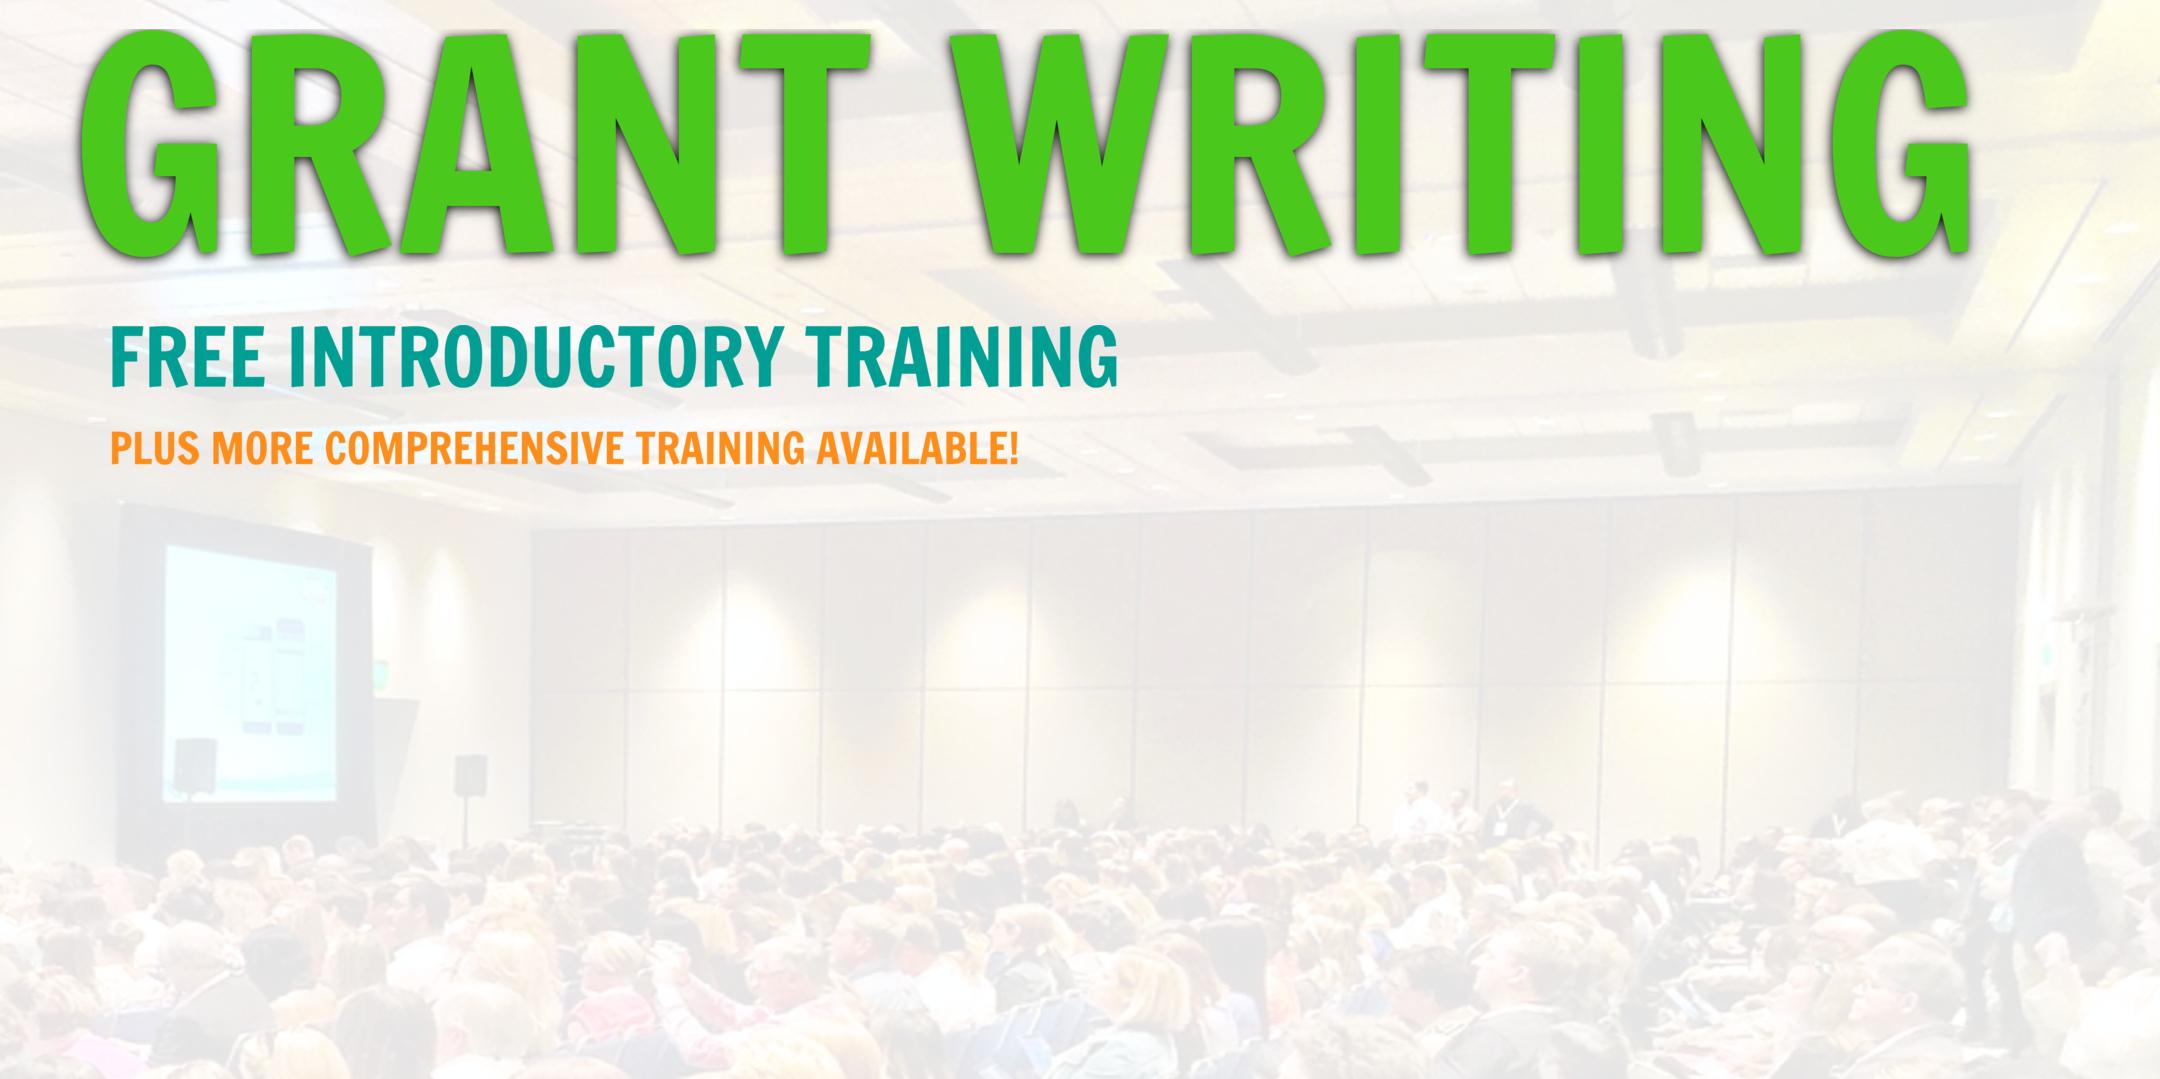 Grant Writing Introductory Training... Evansville, Indiana